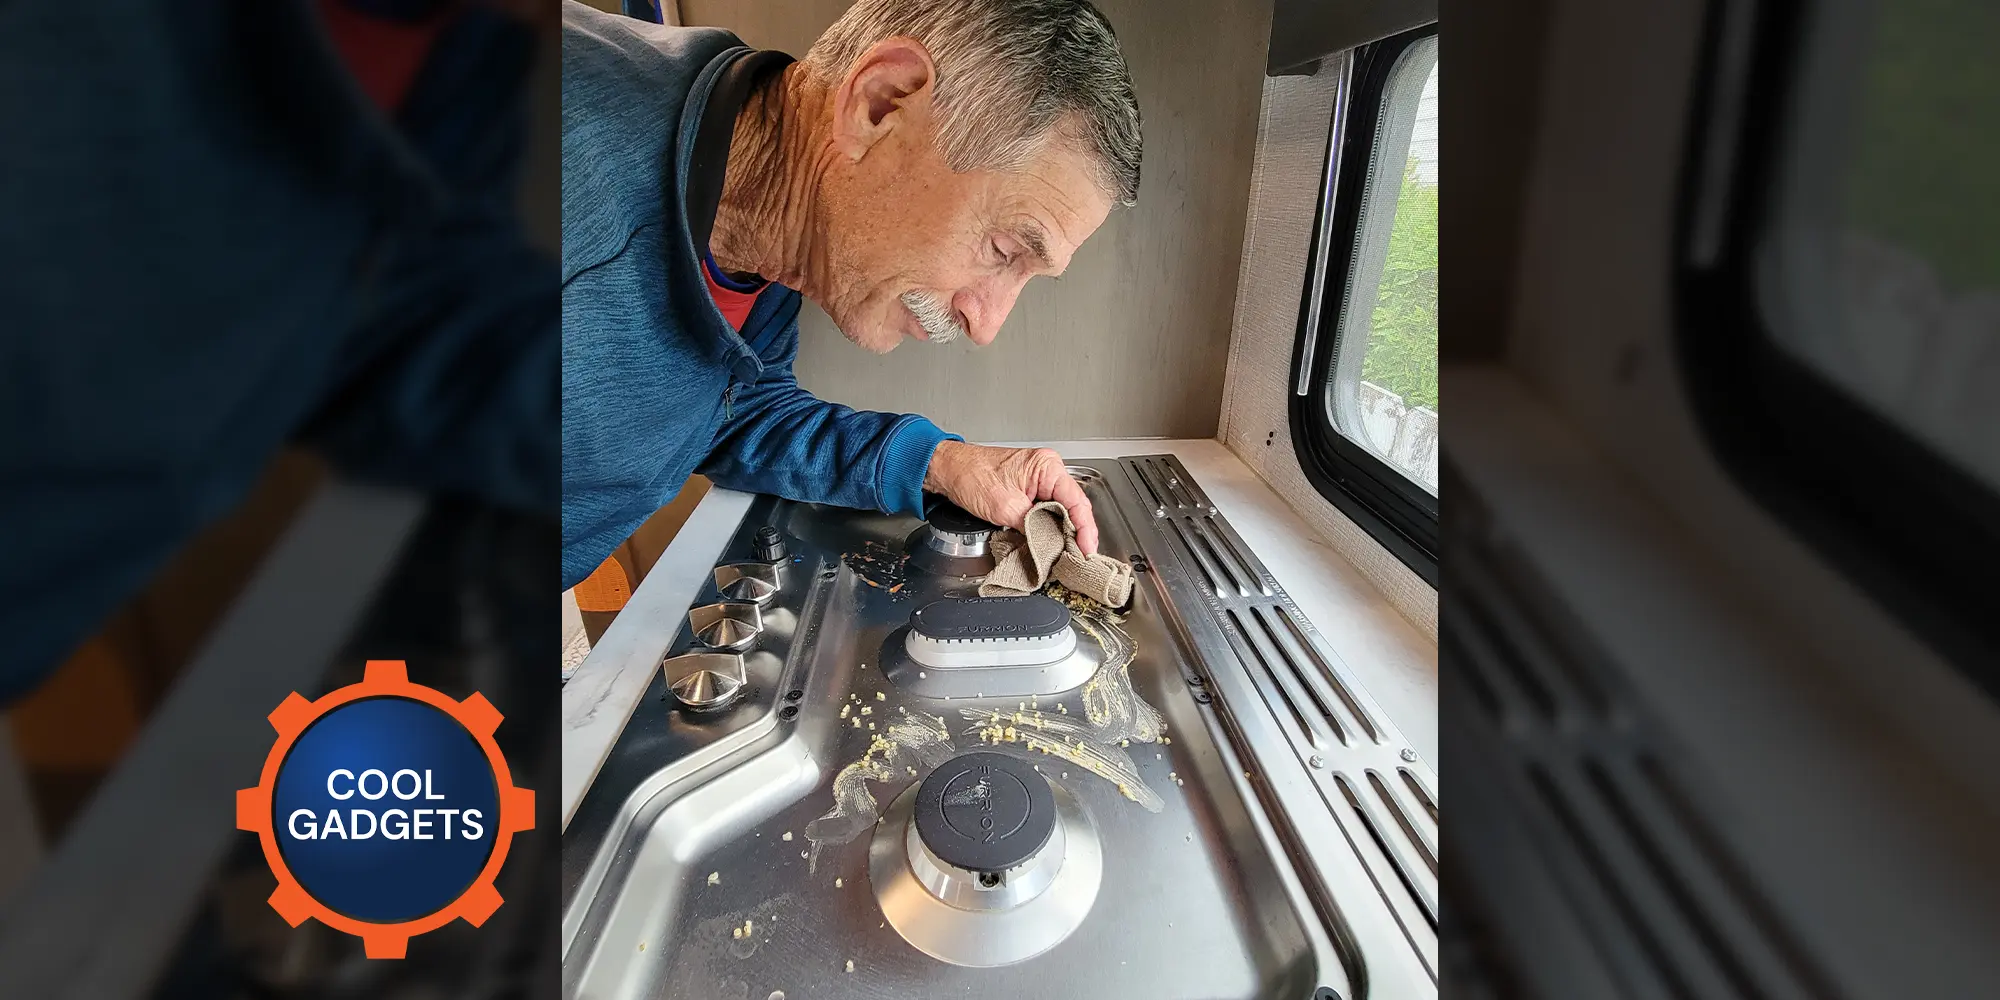 a man leans in close to clean a foodstuff mess on an RV cooktop